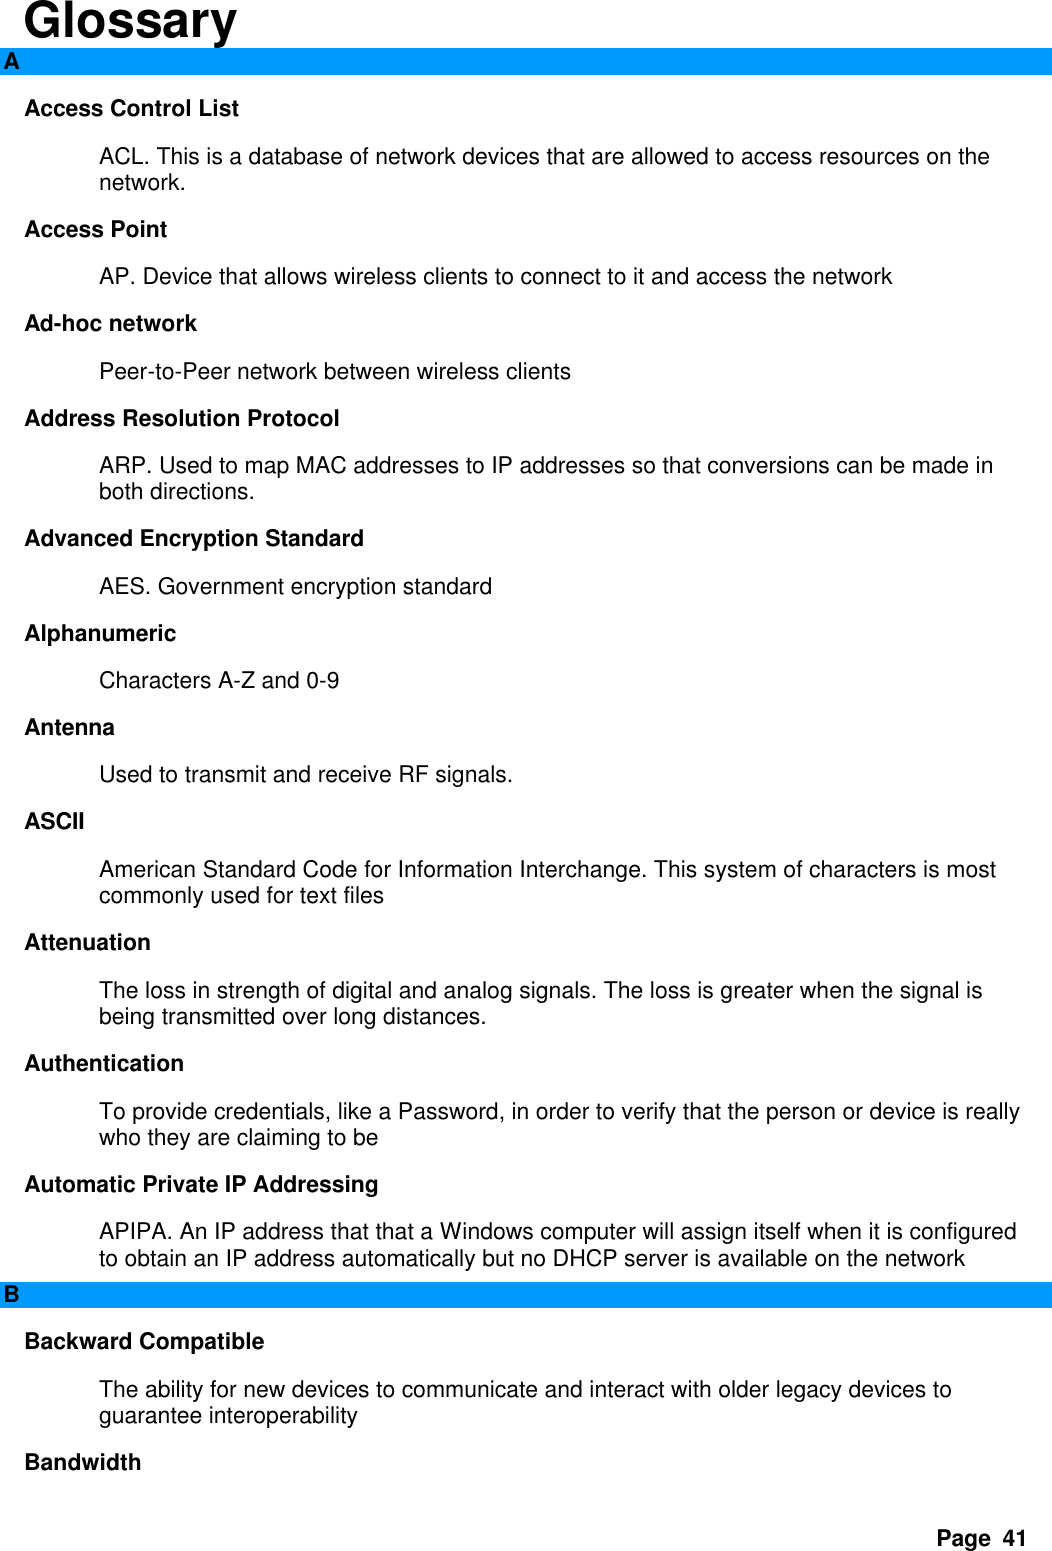 Page  41 Glossary A Access Control List   ACL. This is a database of network devices that are allowed to access resources on the network.   Access Point   AP. Device that allows wireless clients to connect to it and access the network   Ad-hoc network   Peer-to-Peer network between wireless clients   Address Resolution Protocol   ARP. Used to map MAC addresses to IP addresses so that conversions can be made in both directions.   Advanced Encryption Standard   AES. Government encryption standard   Alphanumeric   Characters A-Z and 0-9   Antenna   Used to transmit and receive RF signals.   ASCII   American Standard Code for Information Interchange. This system of characters is most commonly used for text files   Attenuation   The loss in strength of digital and analog signals. The loss is greater when the signal is being transmitted over long distances.   Authentication   To provide credentials, like a Password, in order to verify that the person or device is really who they are claiming to be   Automatic Private IP Addressing   APIPA. An IP address that that a Windows computer will assign itself when it is configured to obtain an IP address automatically but no DHCP server is available on the network   B Backward Compatible   The ability for new devices to communicate and interact with older legacy devices to guarantee interoperability   Bandwidth   